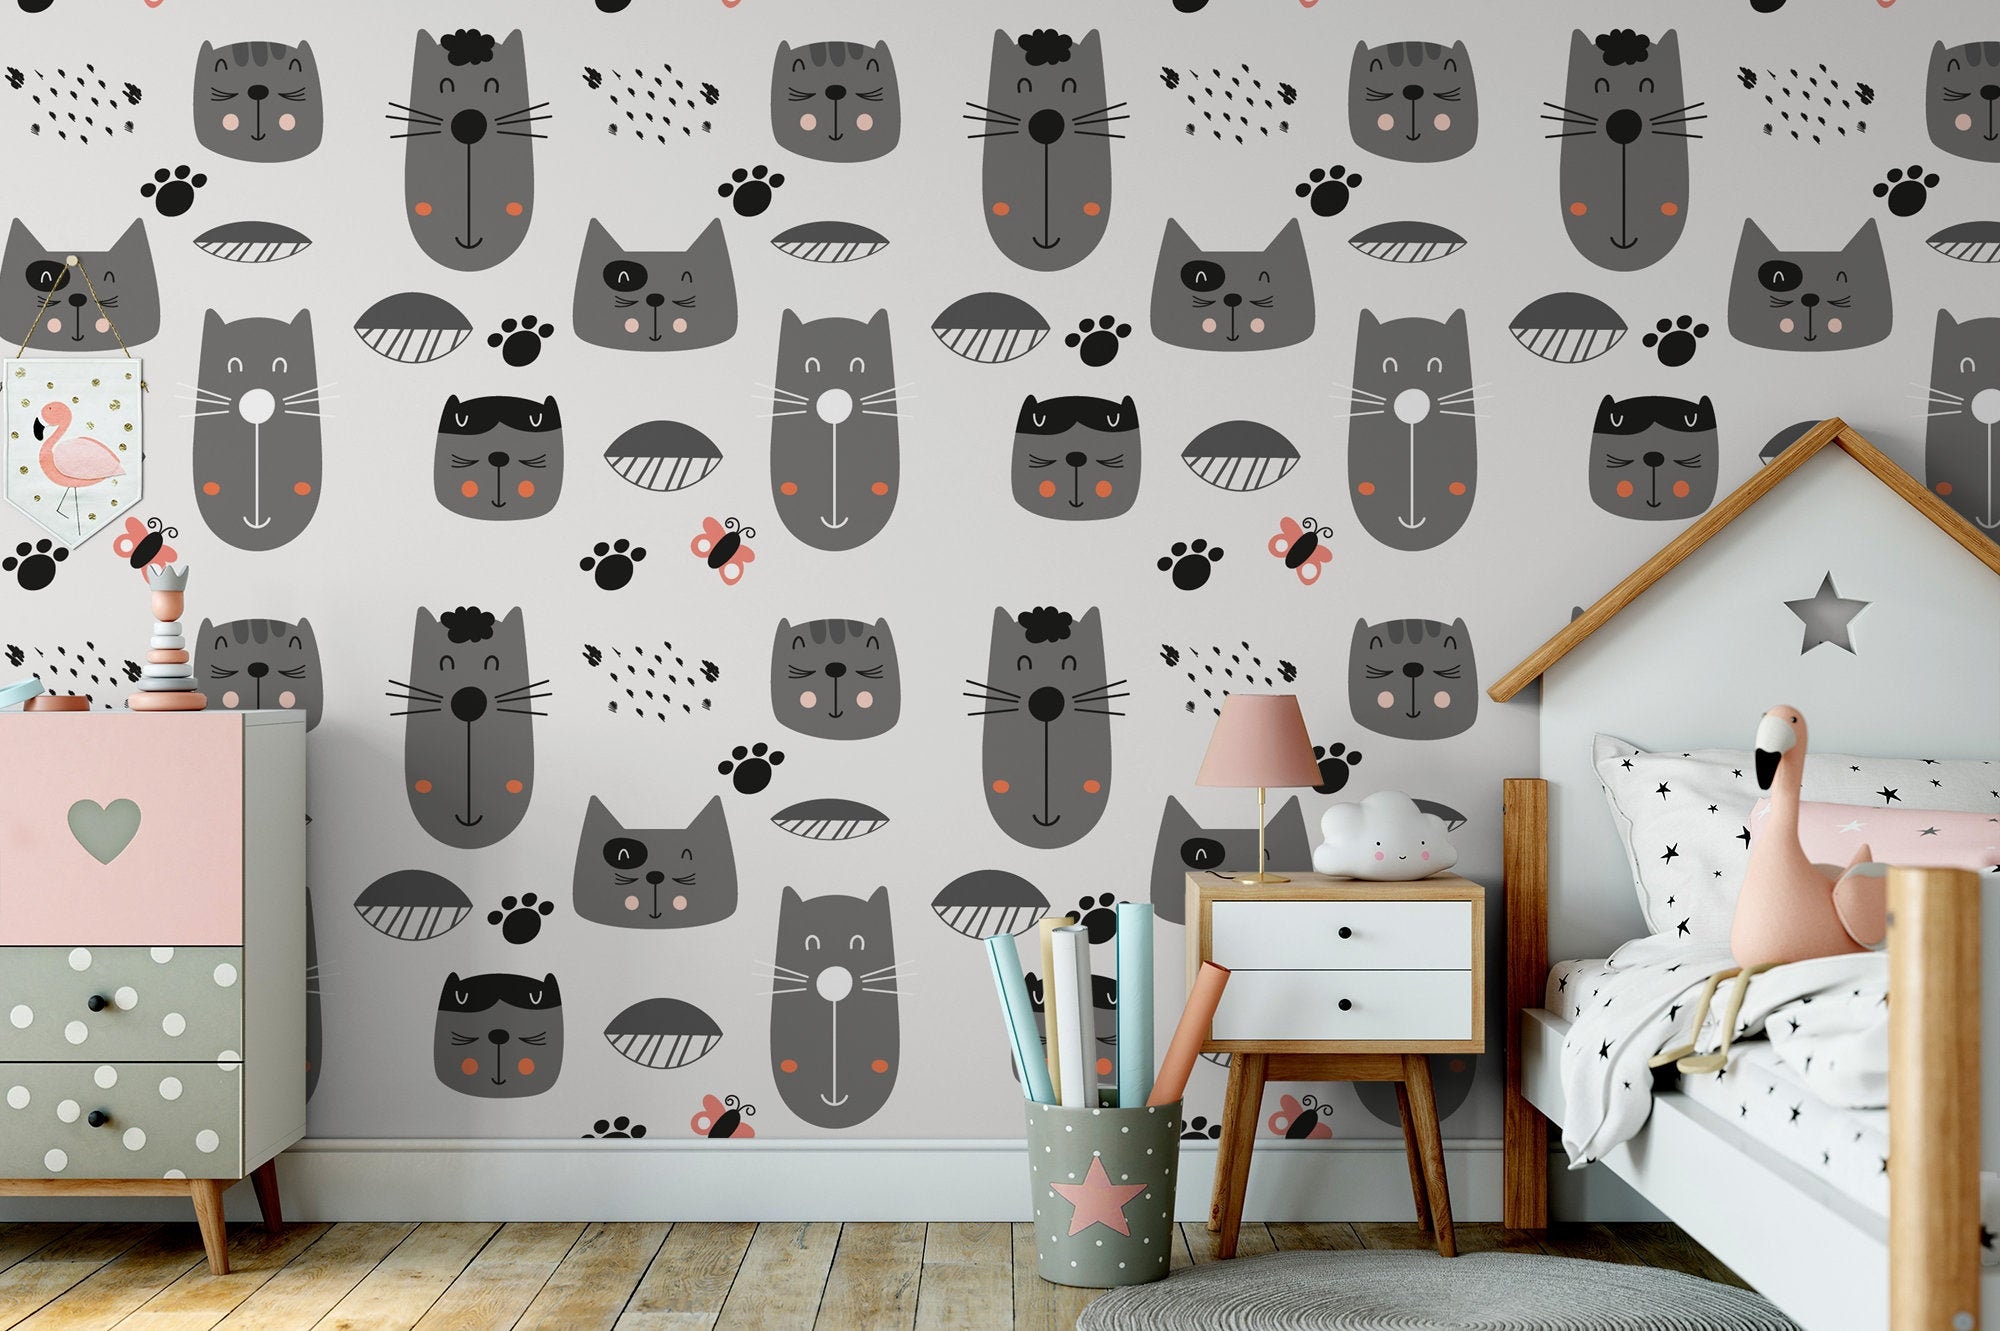 White wallpaper with funny gray cat pattern For Kids self | Etsy